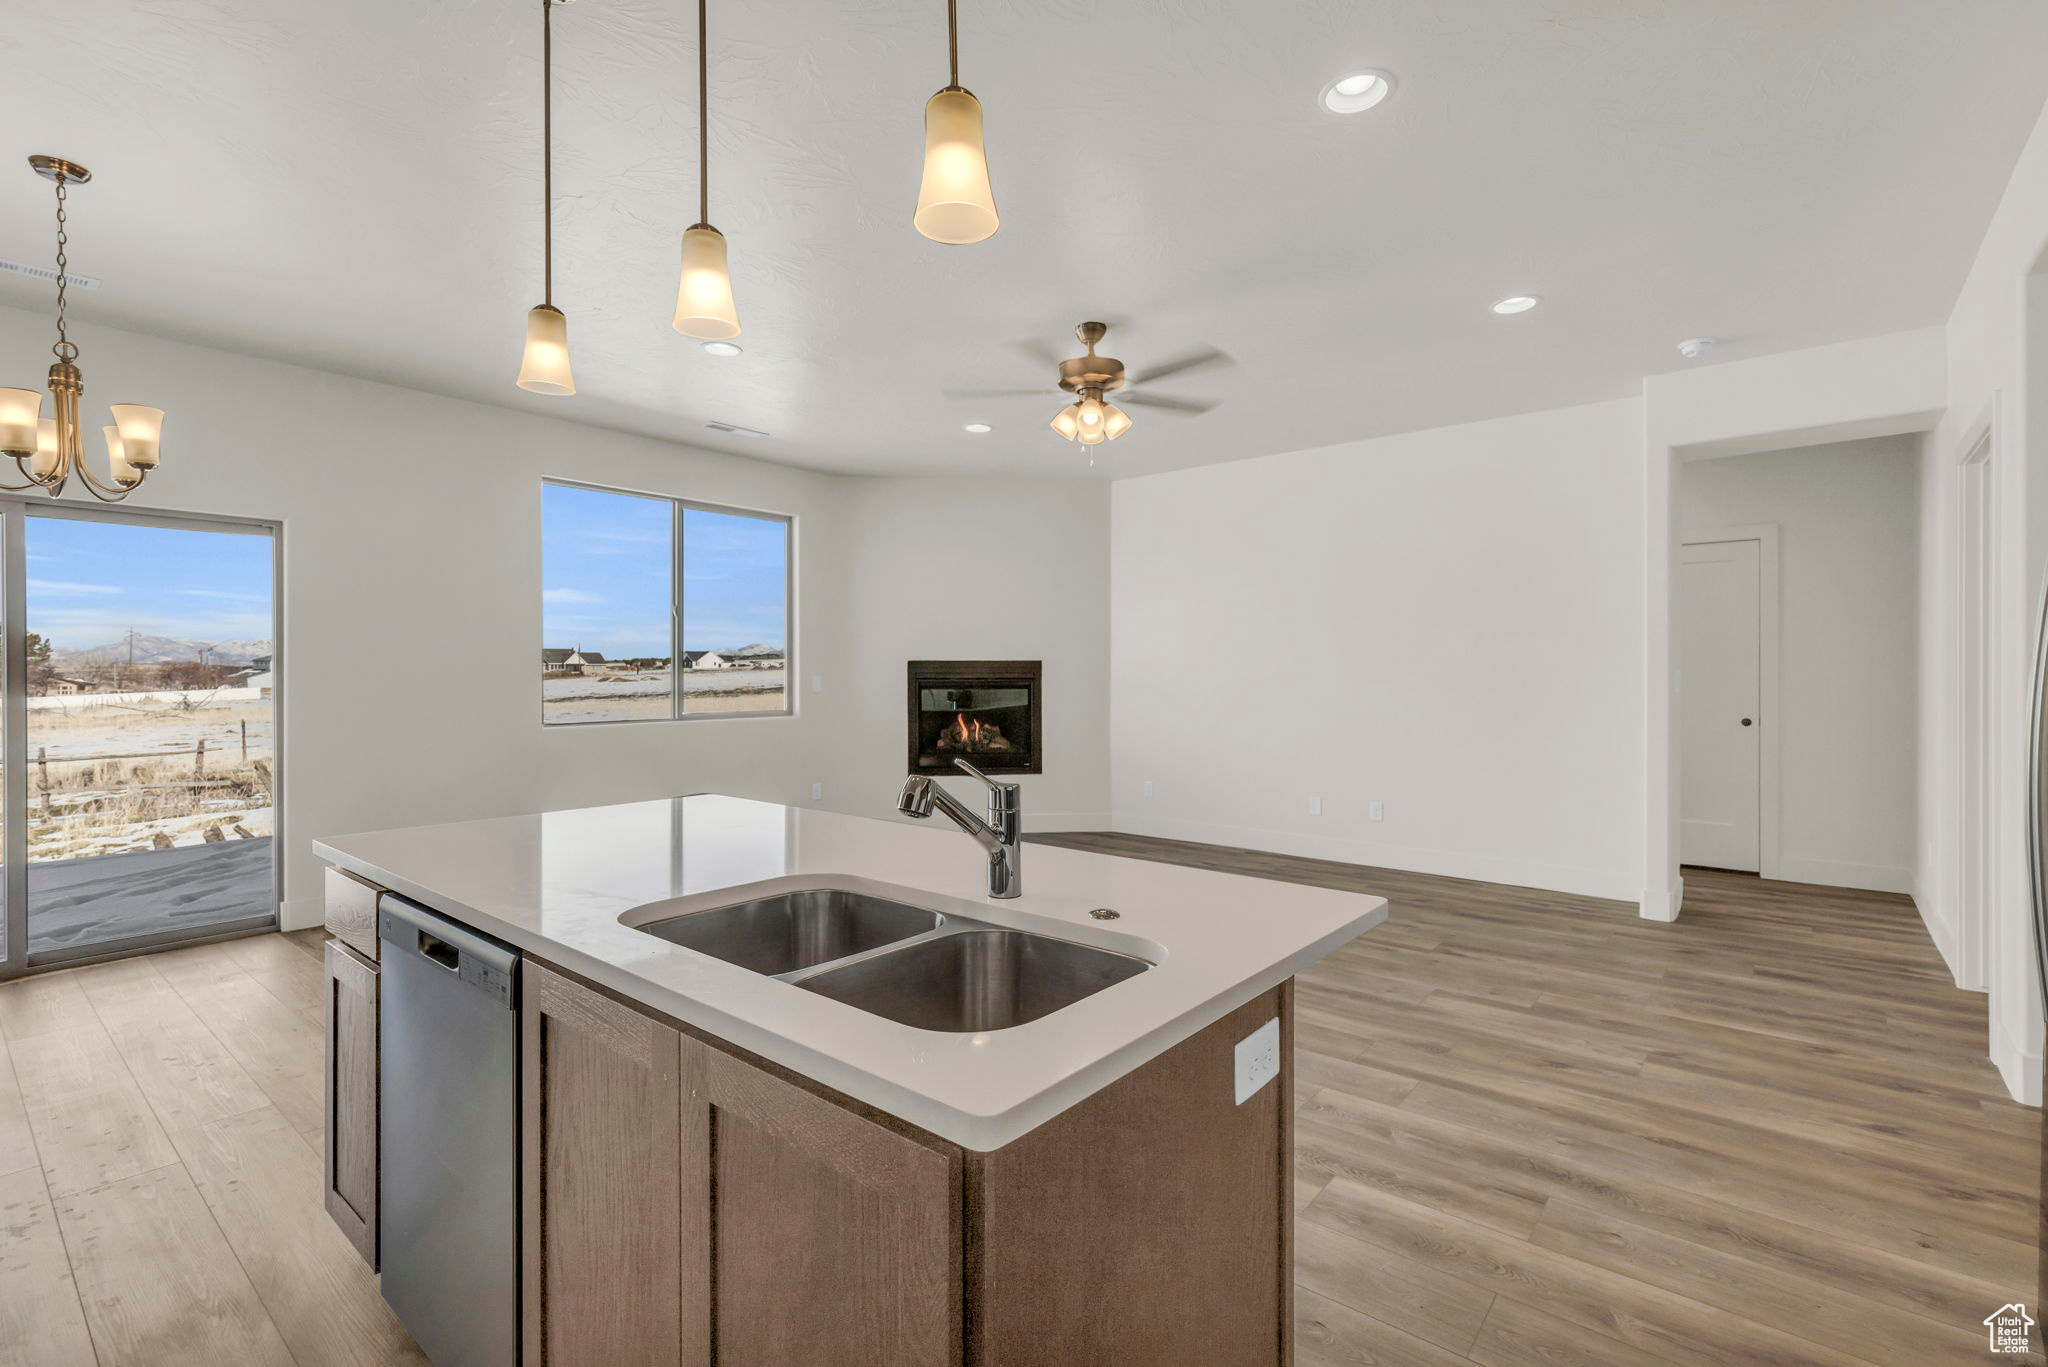 Kitchen featuring a center island with sink, light wood-type flooring, ceiling fan with notable chandelier, sink, and stainless steel dishwasher